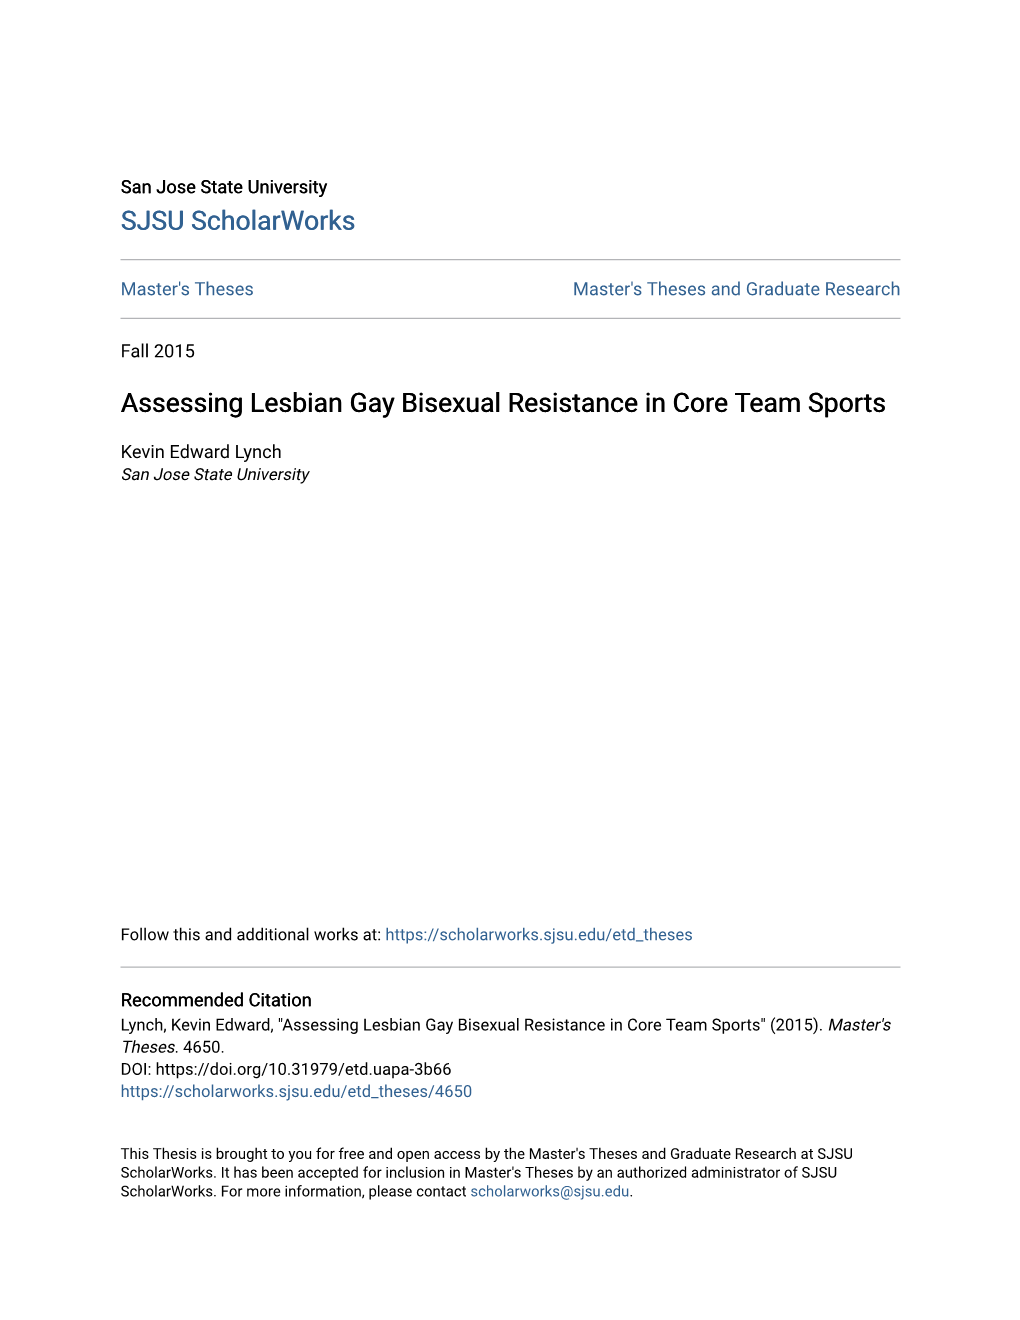 Assessing Lesbian Gay Bisexual Resistance in Core Team Sports